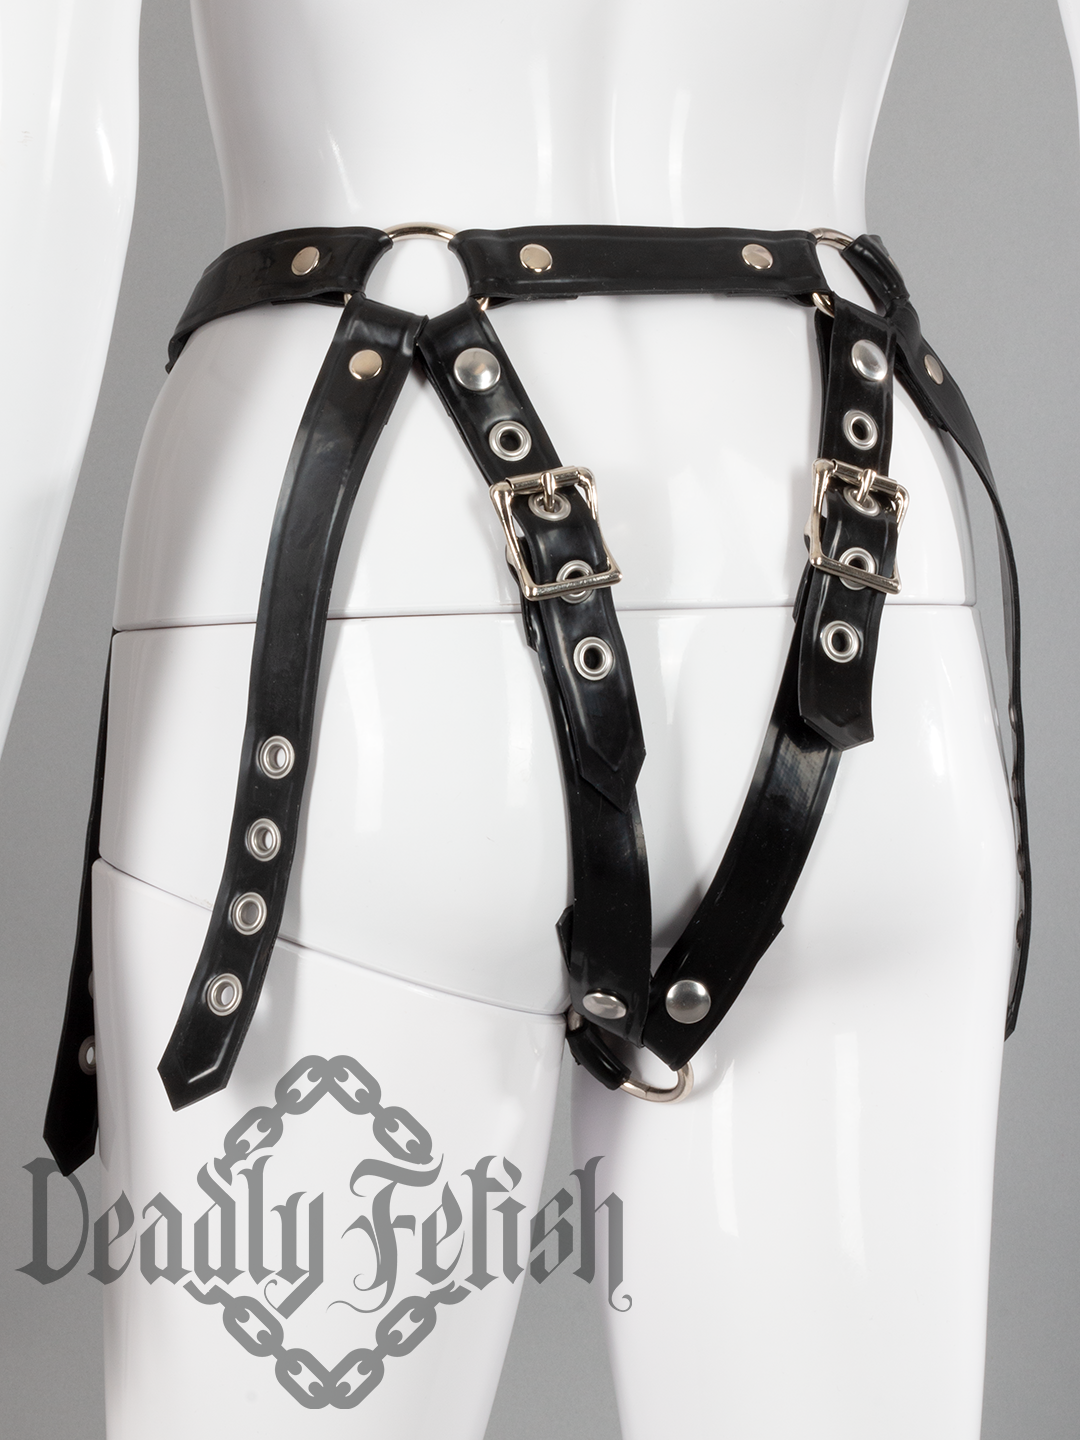 Deadly Fetish Made-To-Order Latex: Harness Addition #09 Straps